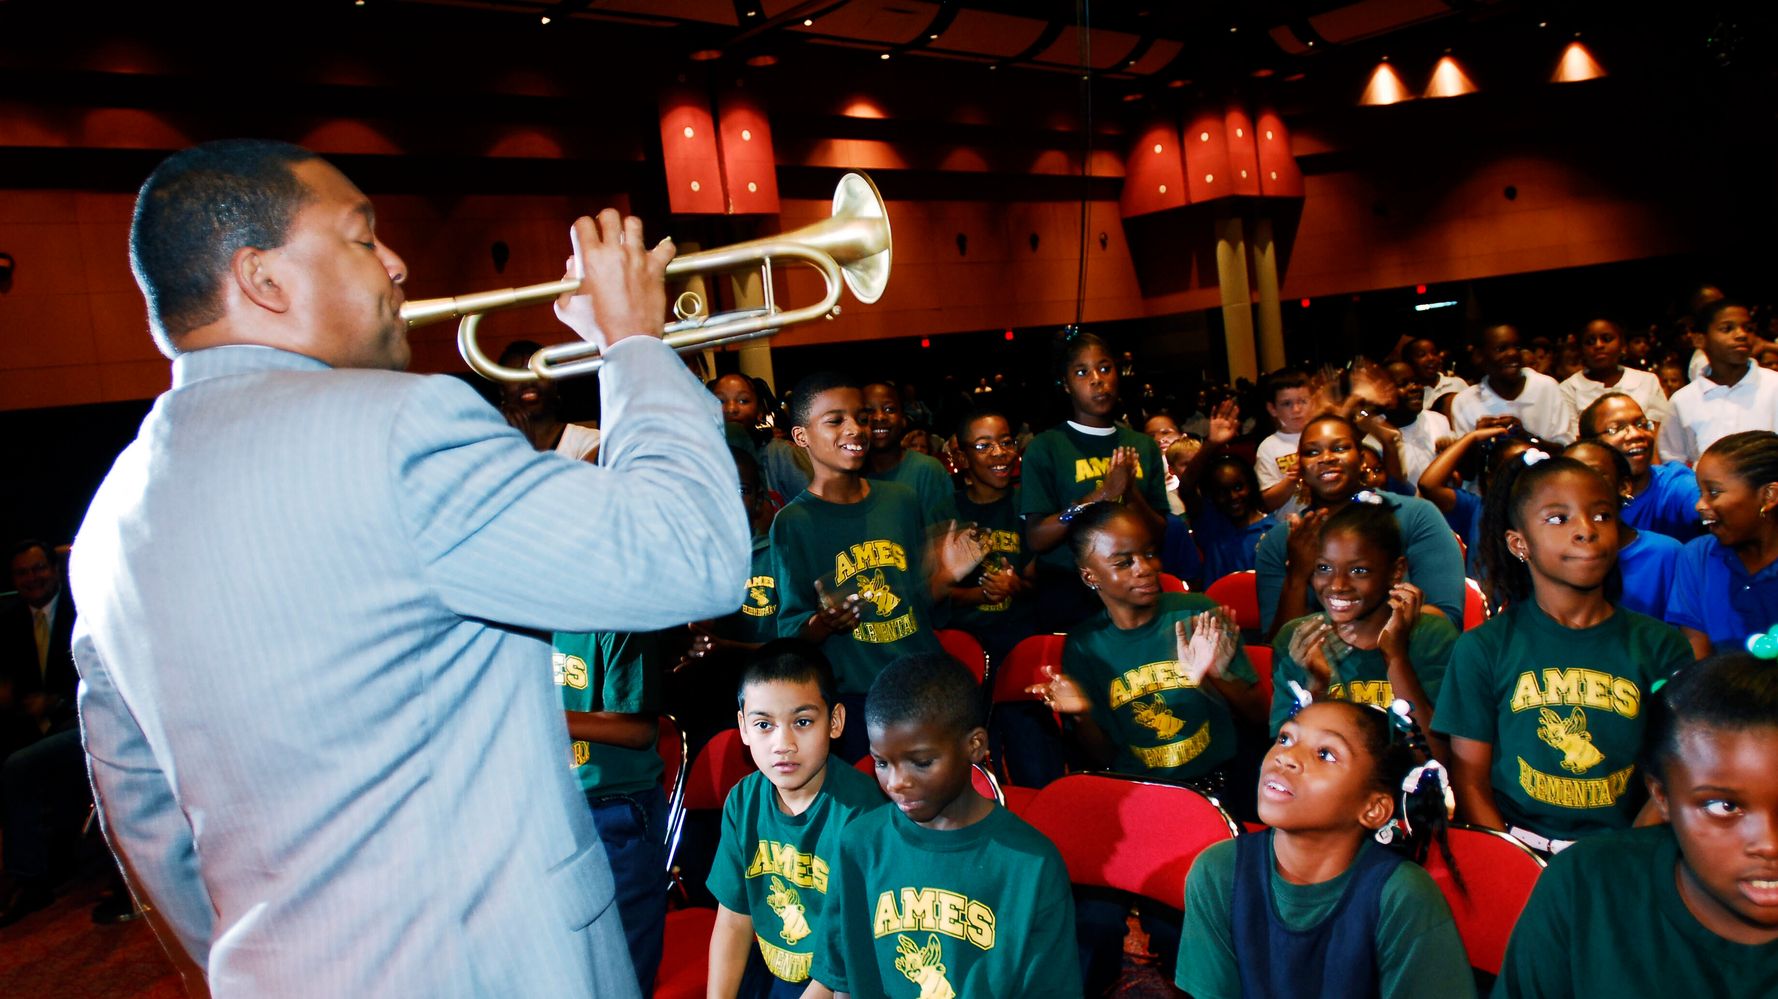 Jazz Has Actually Been Banned In New Orleans Schools Since 1922